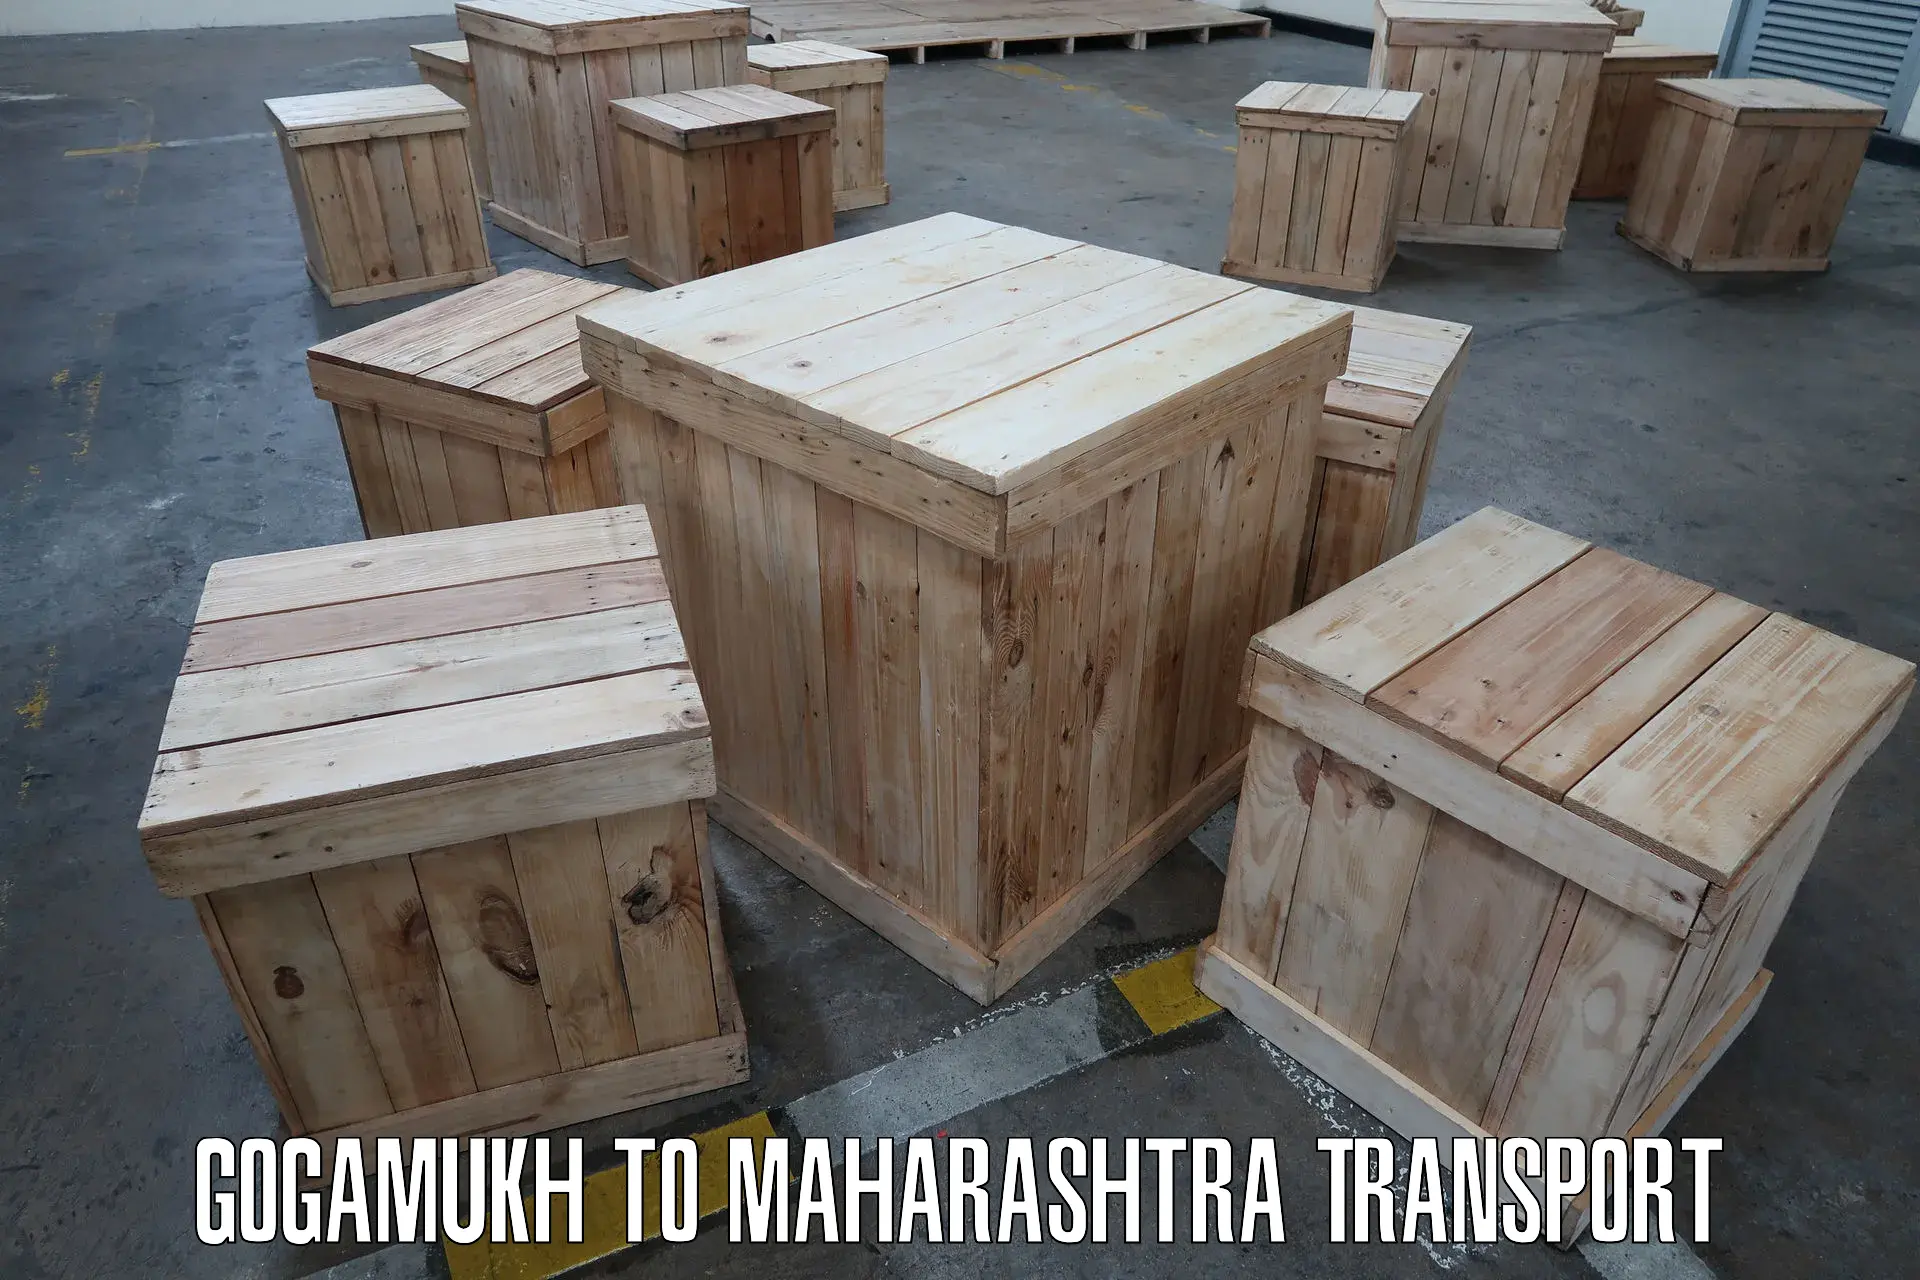 Truck transport companies in India in Gogamukh to Talere